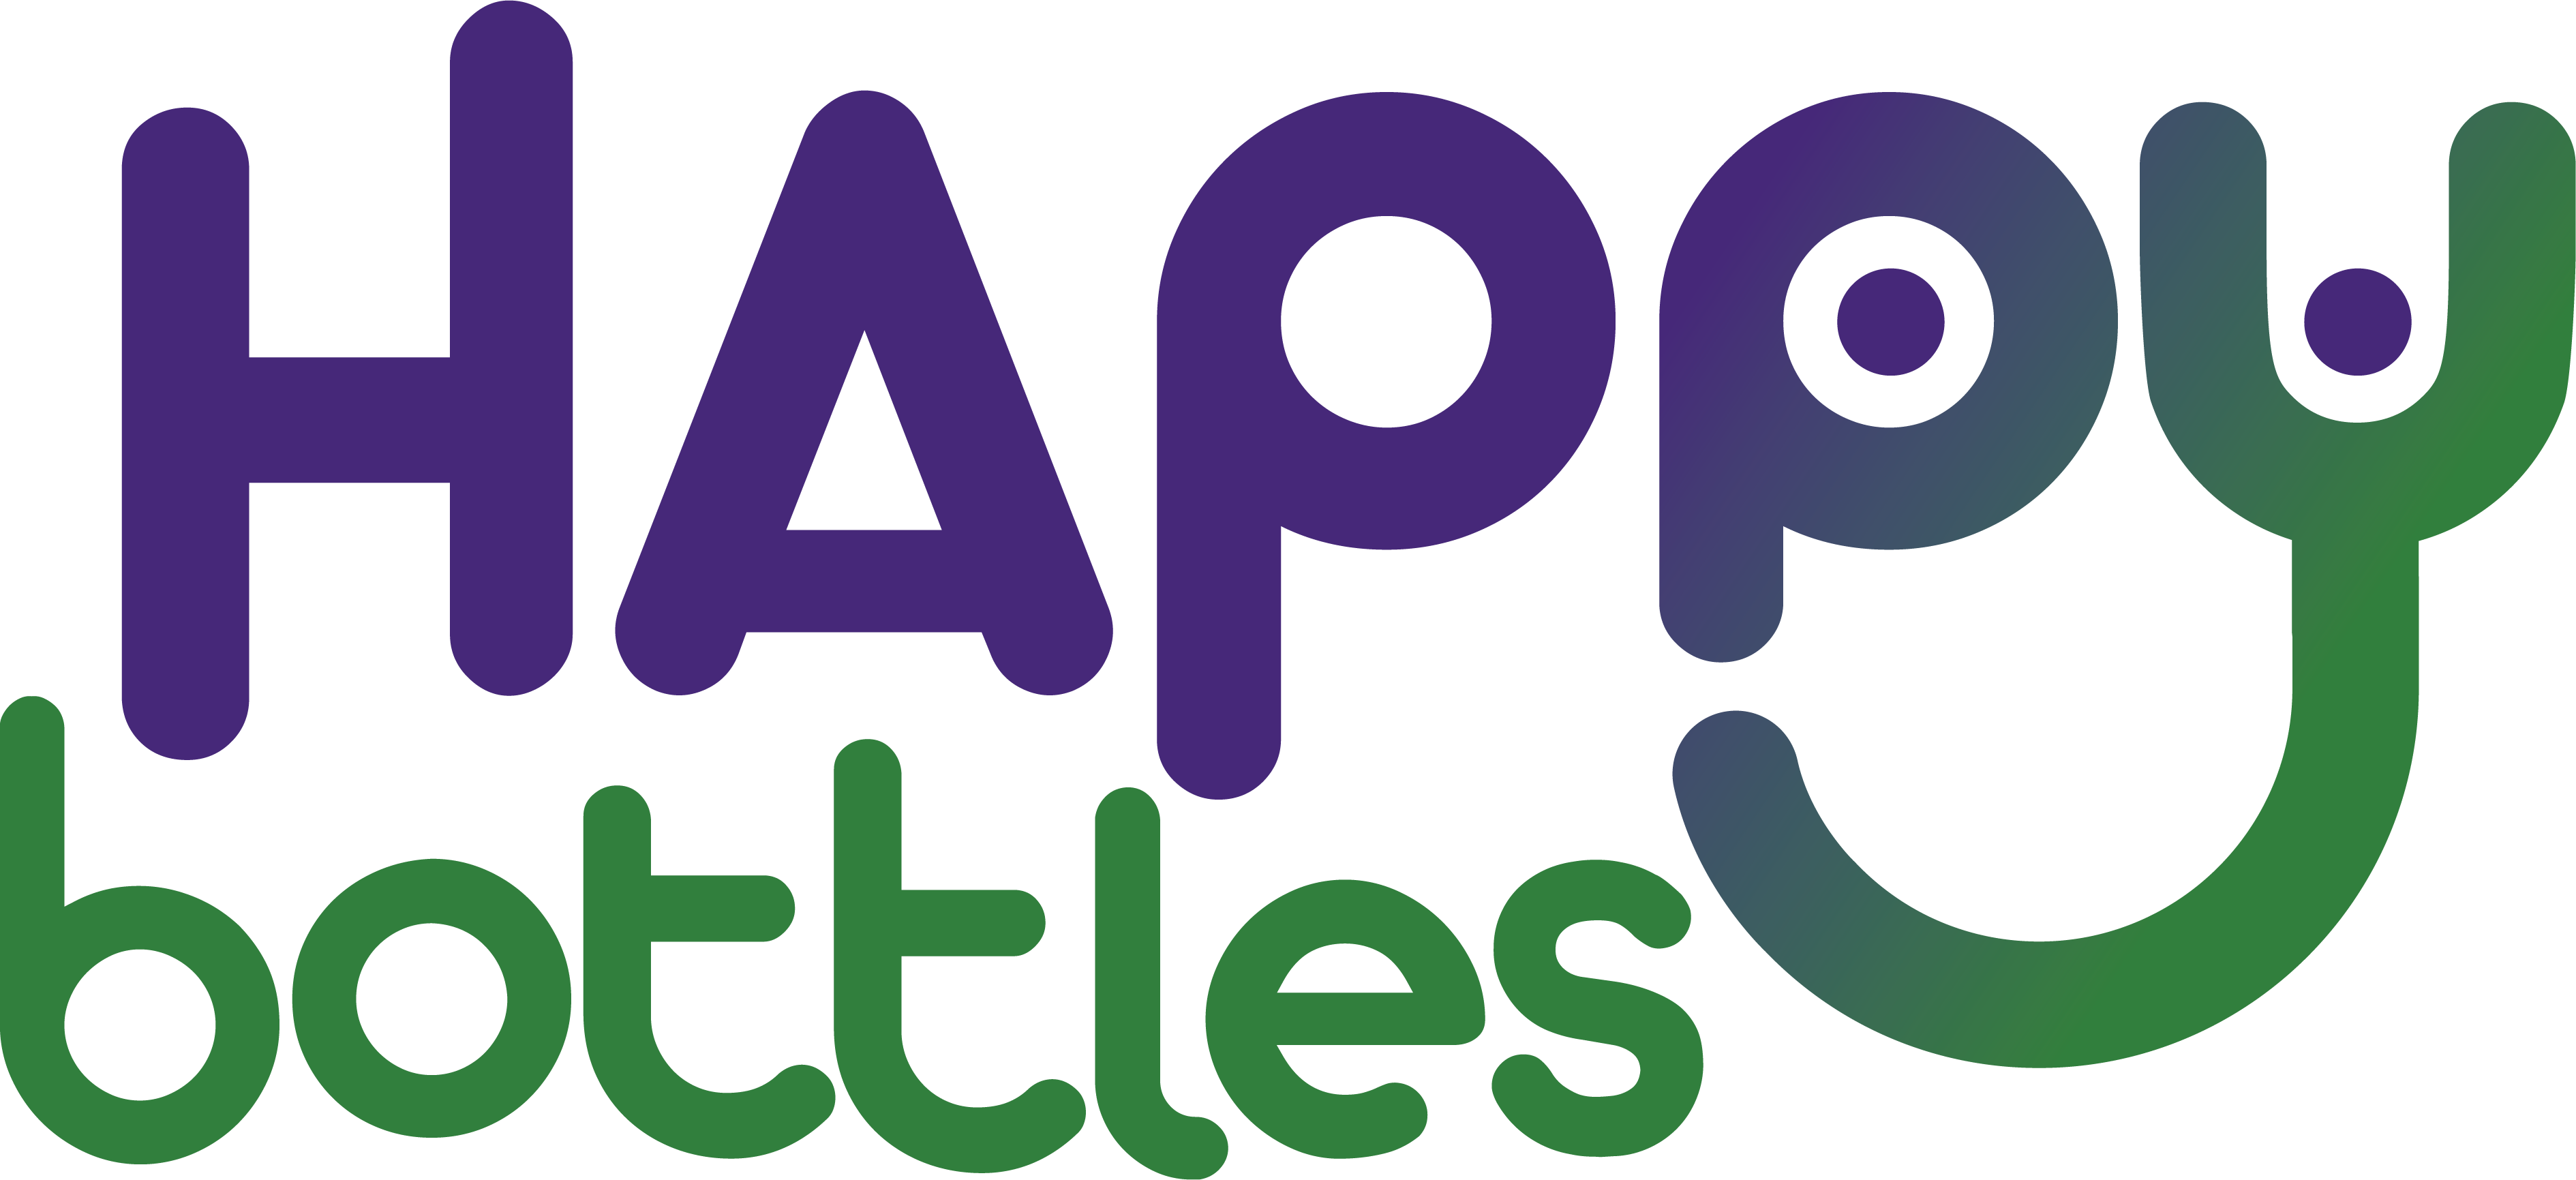 Logo of Happy Bottles Bottle Mnfrs And Suppliers In Stockport, Greater Manchester